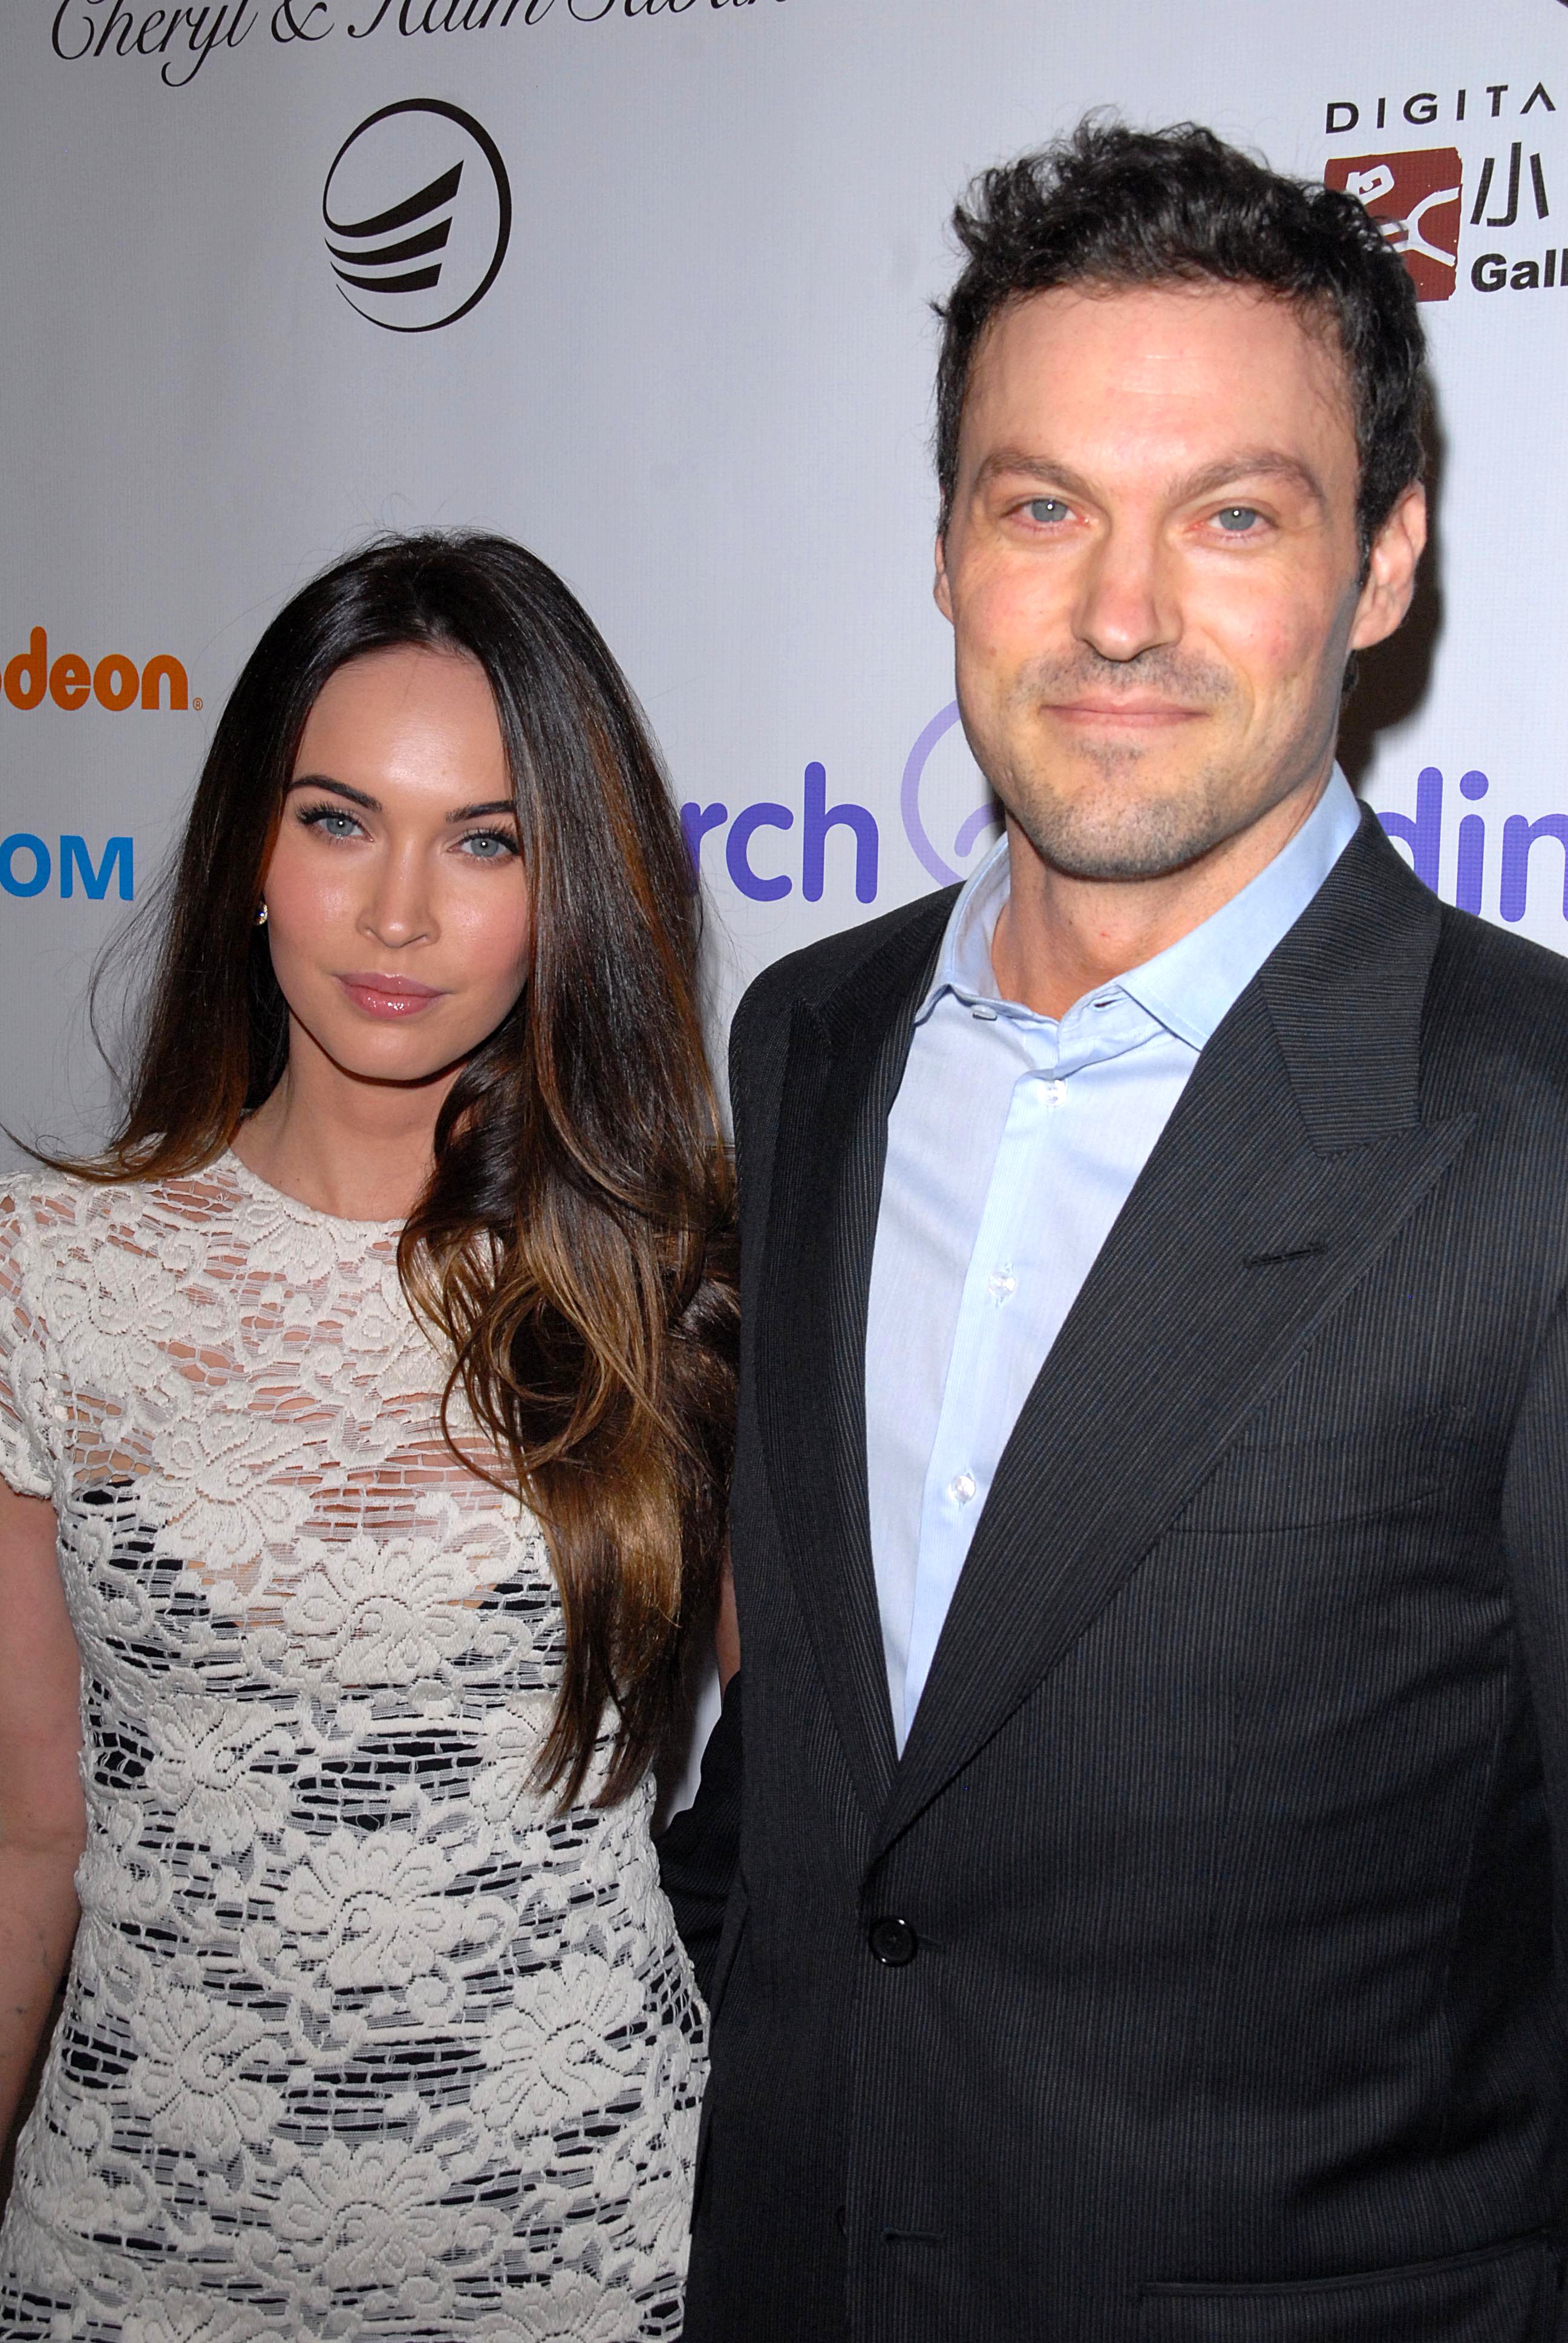 <p>It wasn't mutual love at first sight for <a href="https://www.wonderwall.com/celebrity/profiles/overview/megan-fox-355.article">Megan Fox</a> and Brian Austin Green, who announced their separation in mid-2020 after nearly a decade of marriage. The "Beverly Hills, 90210" actor revealed in a 2019 interview on Barstool Sports' "KFC Radio" podcast that he initially turned down Megan after she showed interest. "She was doing 'Hope and Faith' at the time here in New York with Kelly Ripa and Faith Ford, and I came and did an episode of it," he explained of their first encounter. "I met Megan on that, and she was really young [just 17]. And I was like, 'This isn't this. This can't f****** happen. This isn't going to happen, no way.' And so I left and she was just really persistent -- and thank God." After Brian repeatedly "kept pushing her away early on," he explained, Megan -- who's 13 years his junior and pursued him after she turned 18 -- told him she was going to date other people. "That's when I realized I was, like, 'I must be really into this situation ... the thought of that kills me.' And ... we've been together now for 15 years."</p>